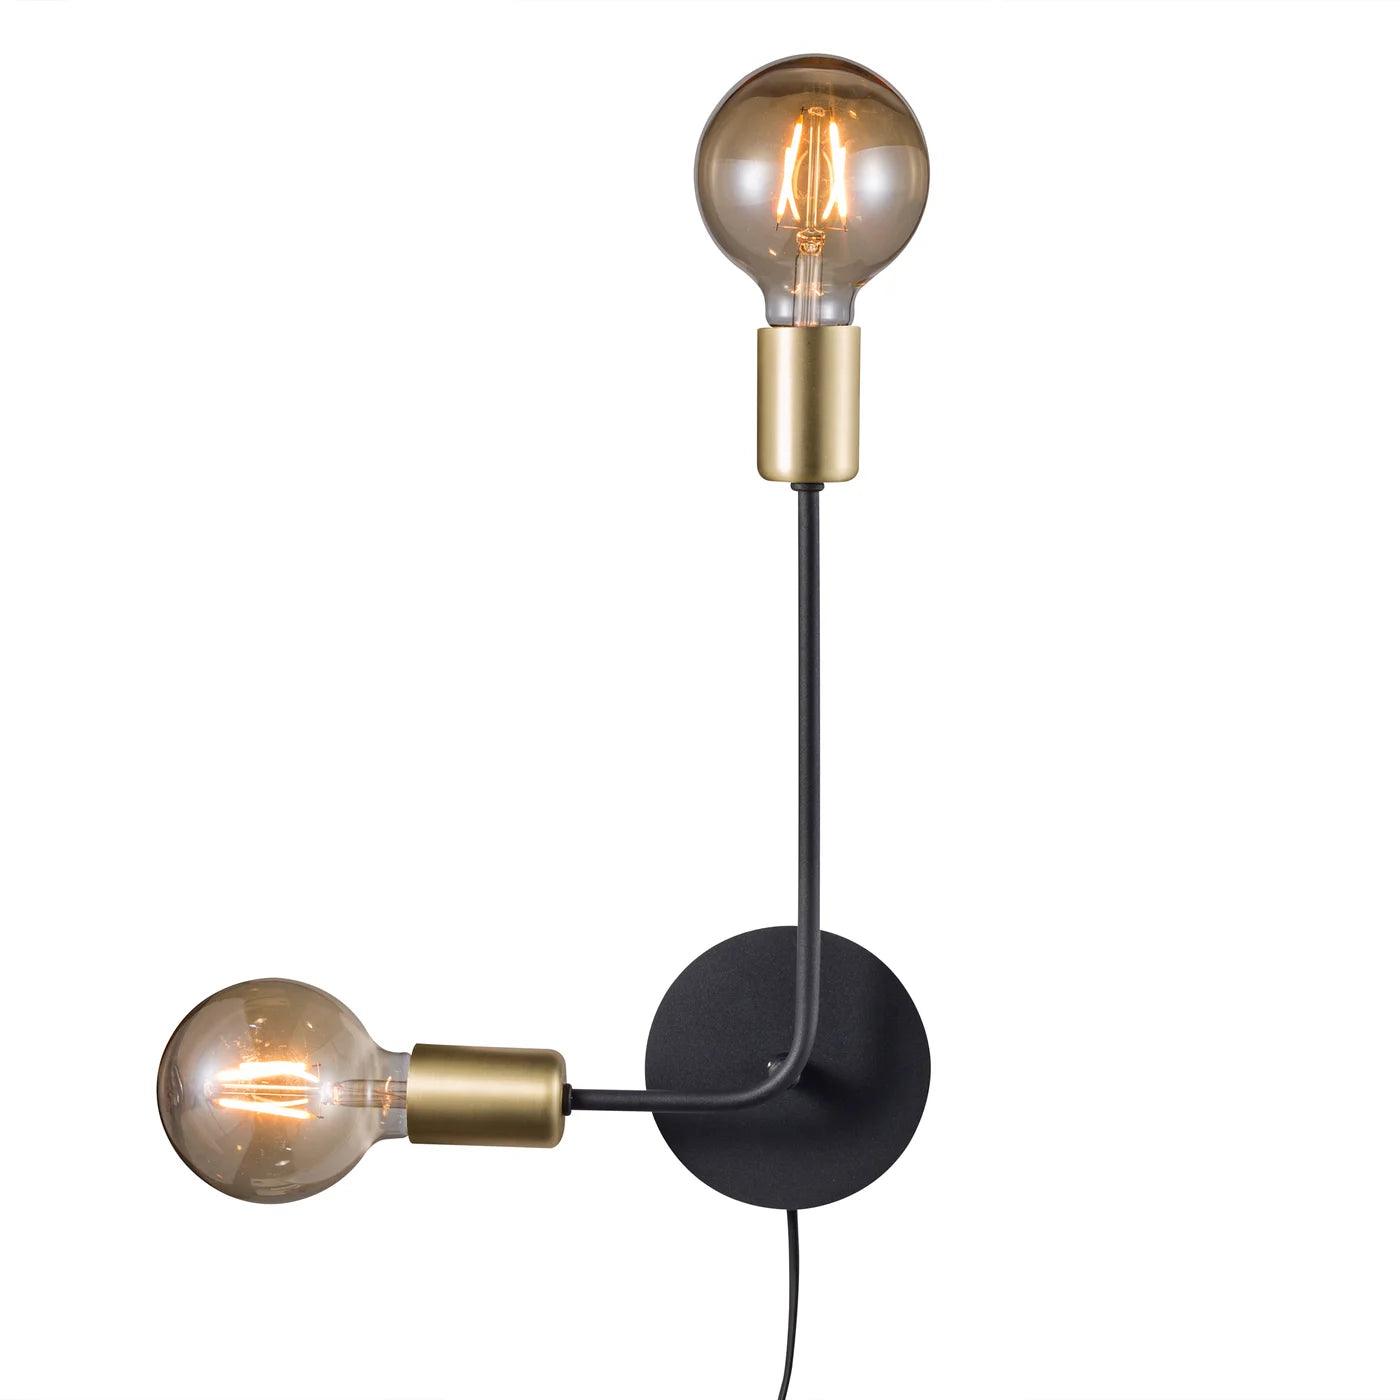 Wall lamp JOSEFINE black with gold details - Eye on Design